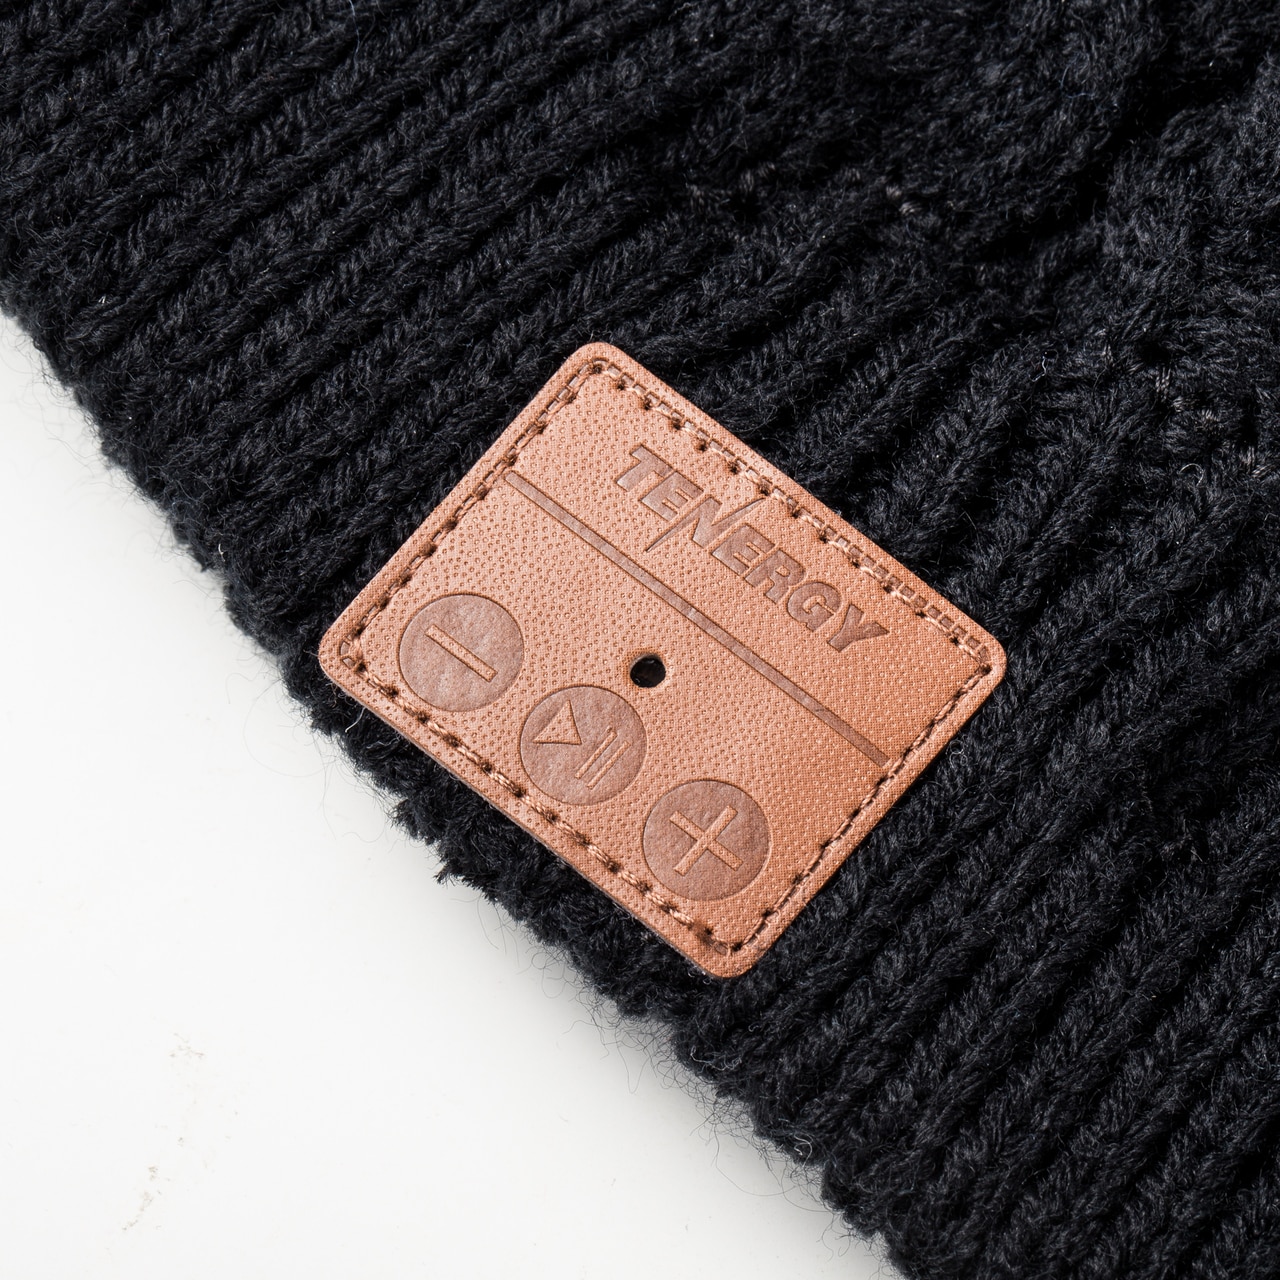 Tenergy Bluetooth Beanie Cable Knit - image 3 of 3